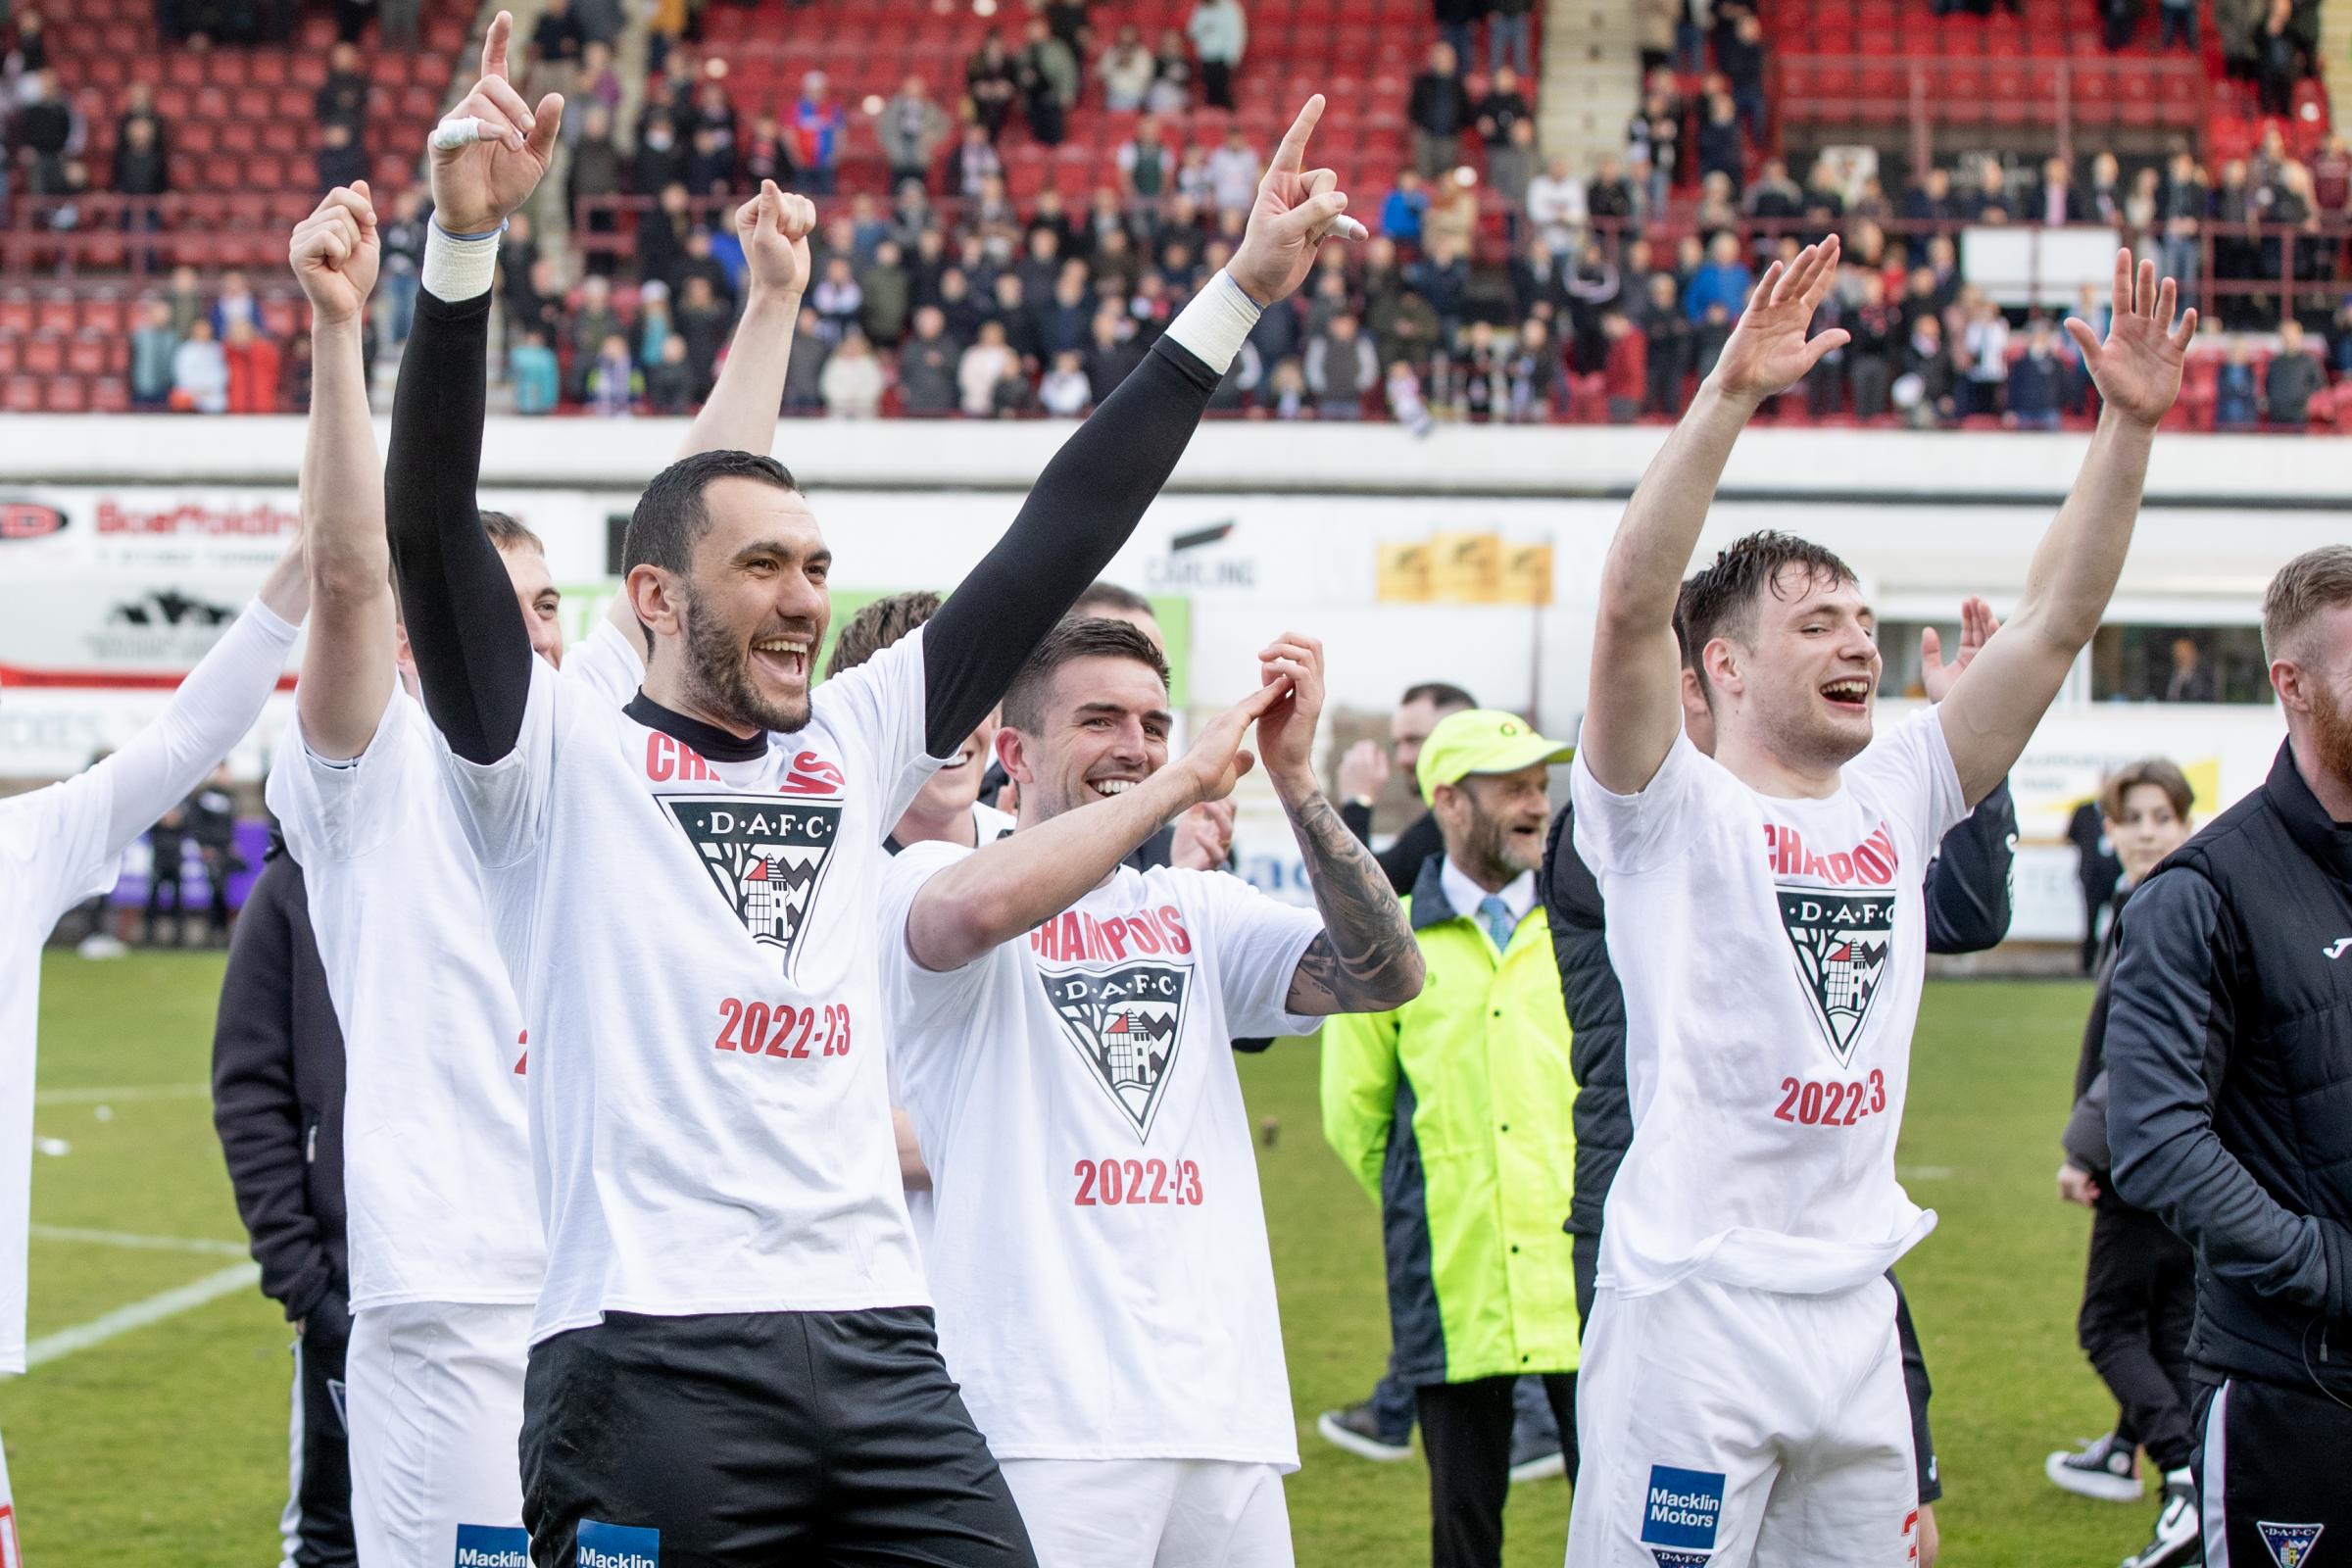 Dunfermline: Deniz Mehmet on League One title and fans support